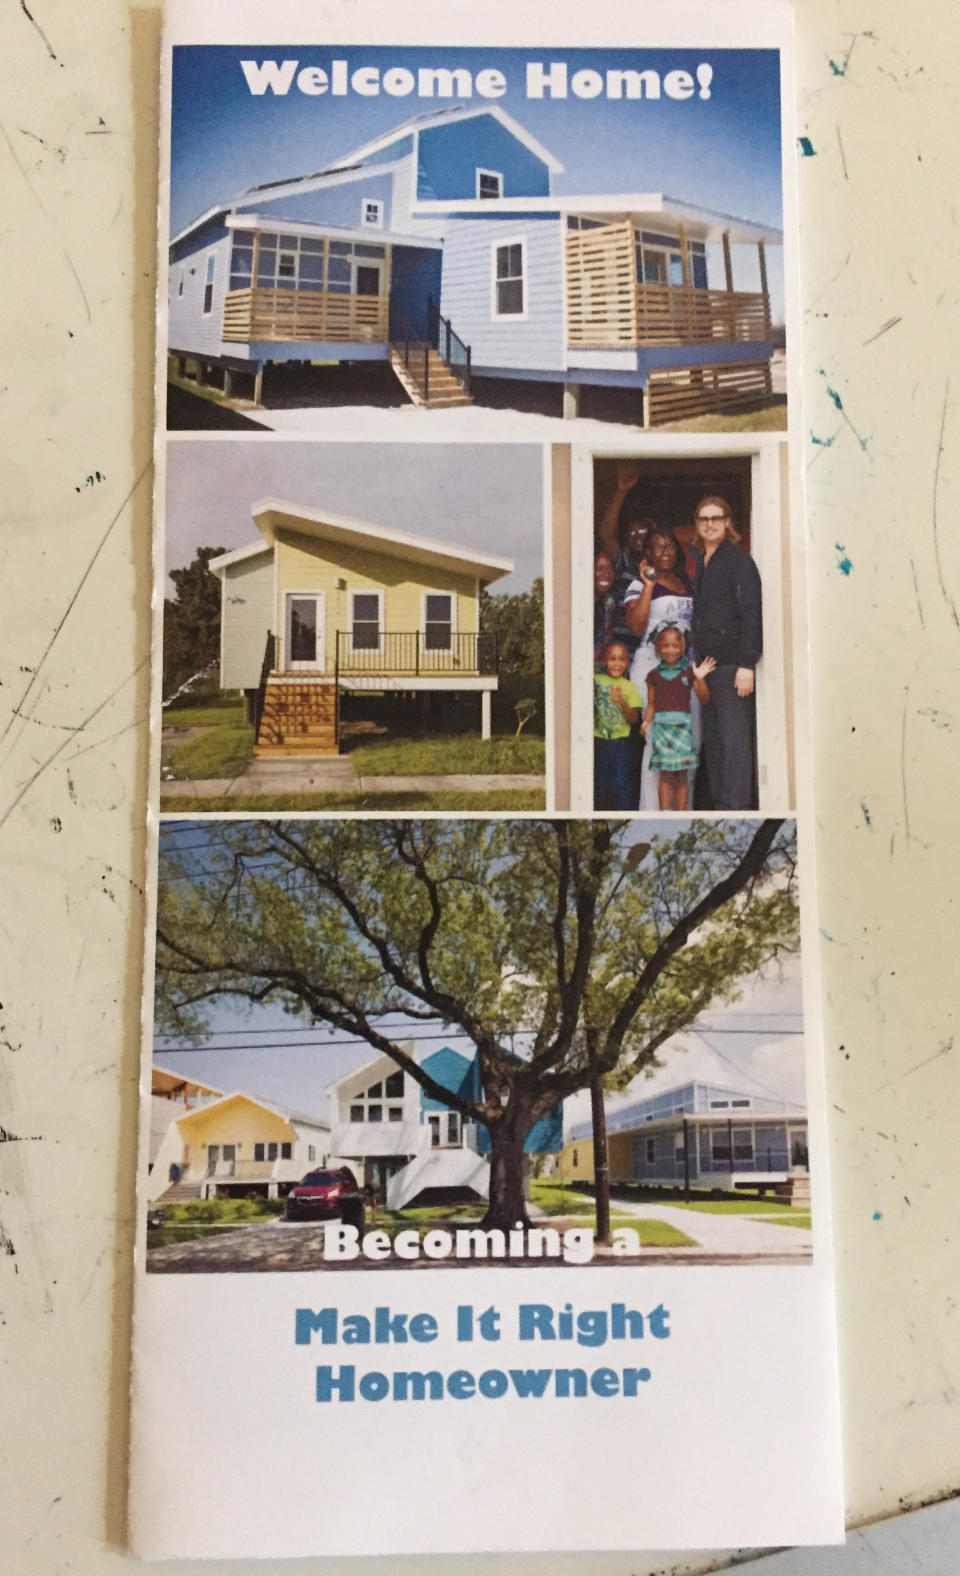 This old Make It Right brochure showcases the homes as brand new. Source: Australscope Photos